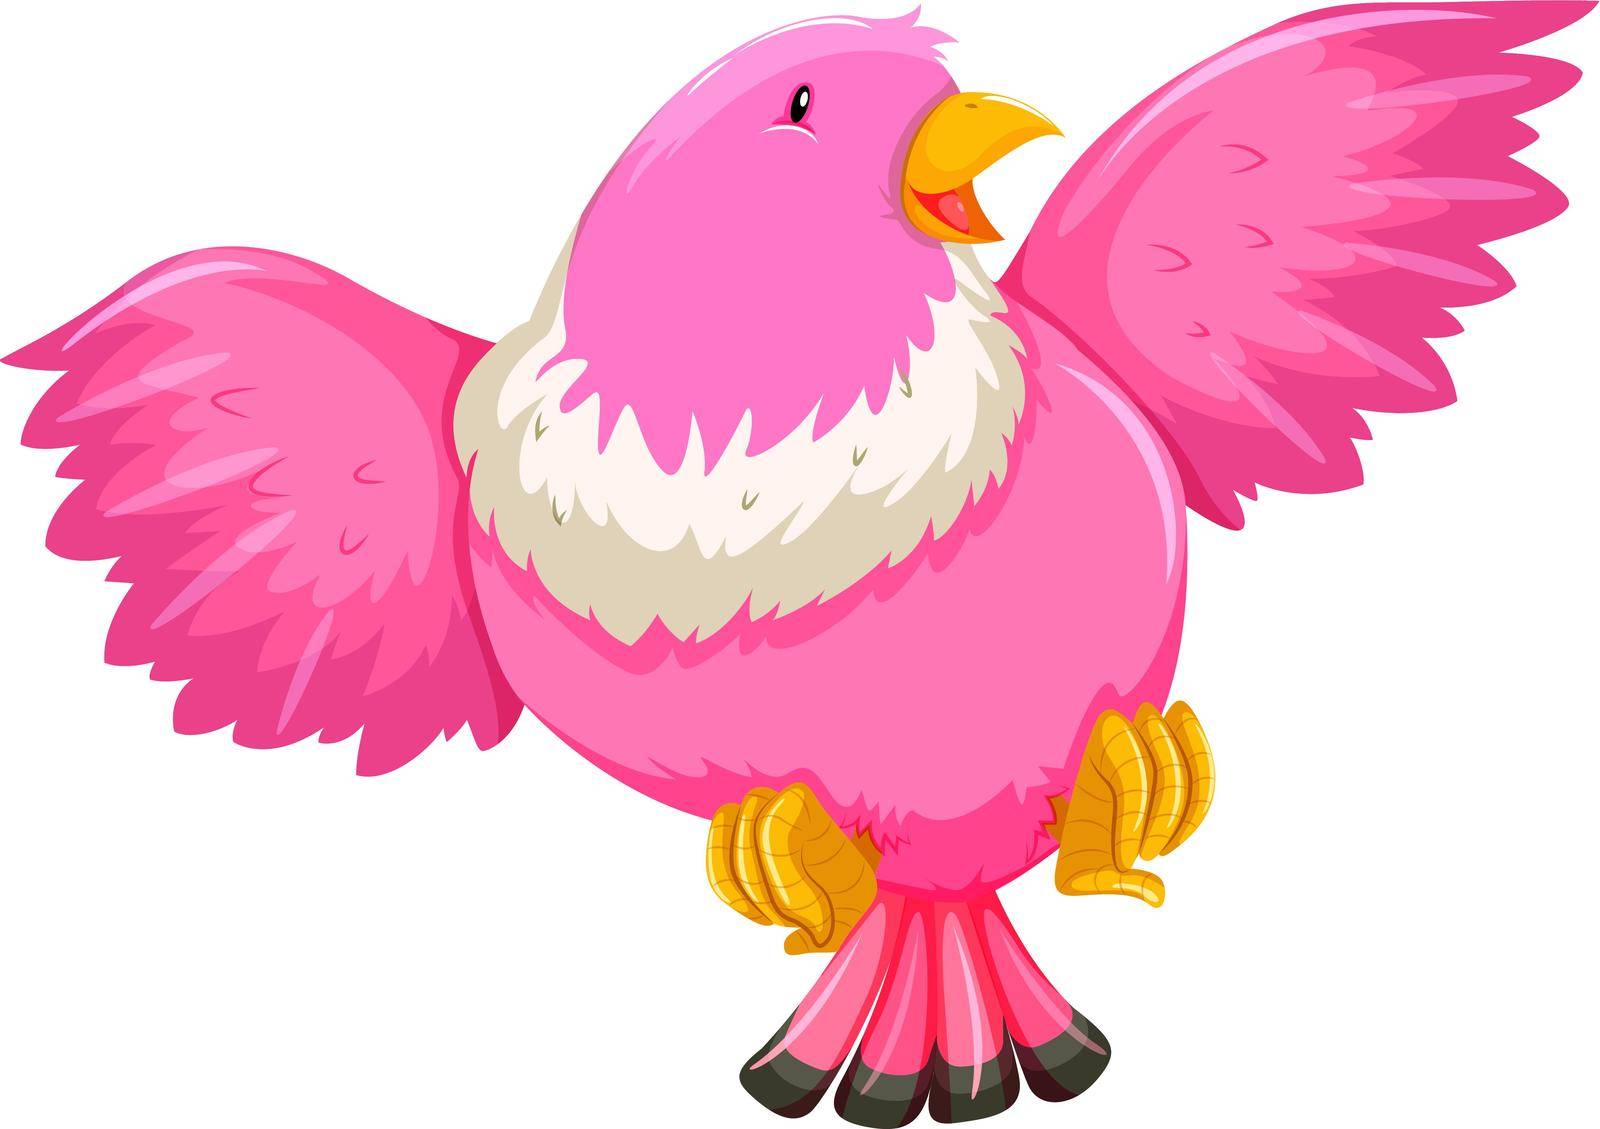 Pink bird with open wings